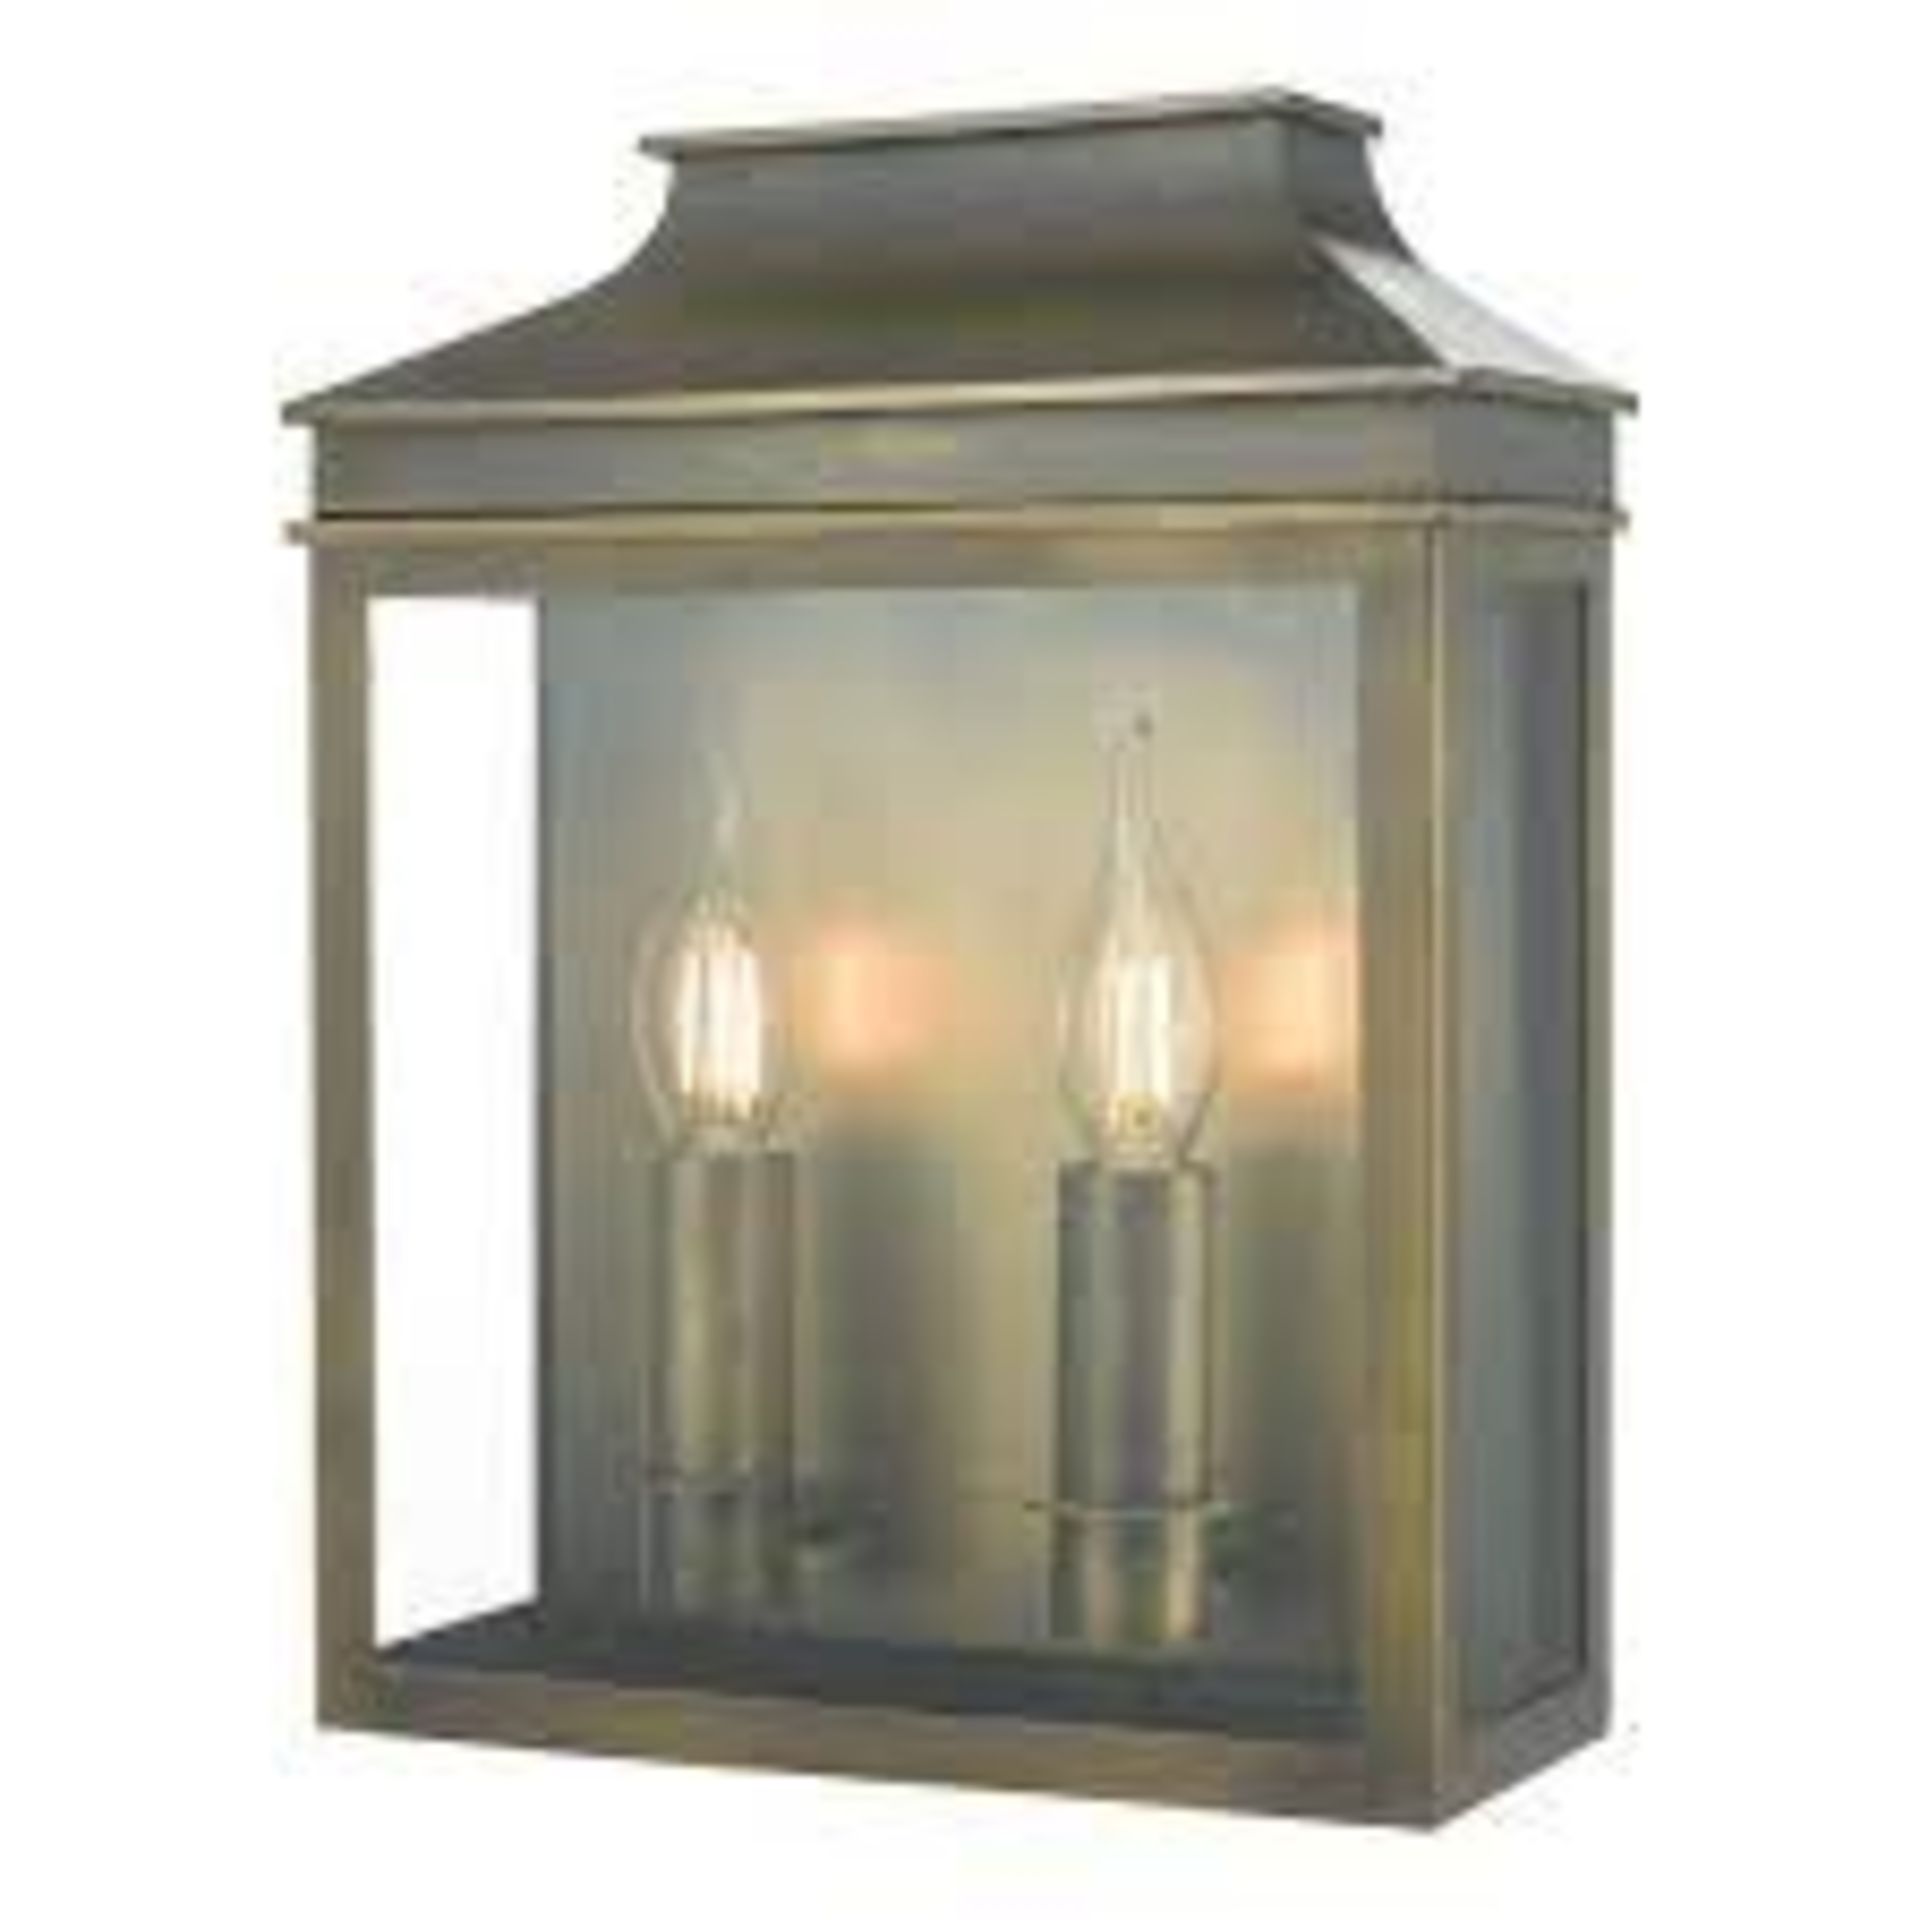 DAR LIGHTING VAPOUR TWO LIGHT OUTDOOR WALL LIGHT IN BRASS WITH CLEAR GLASS RRP £258 EBR